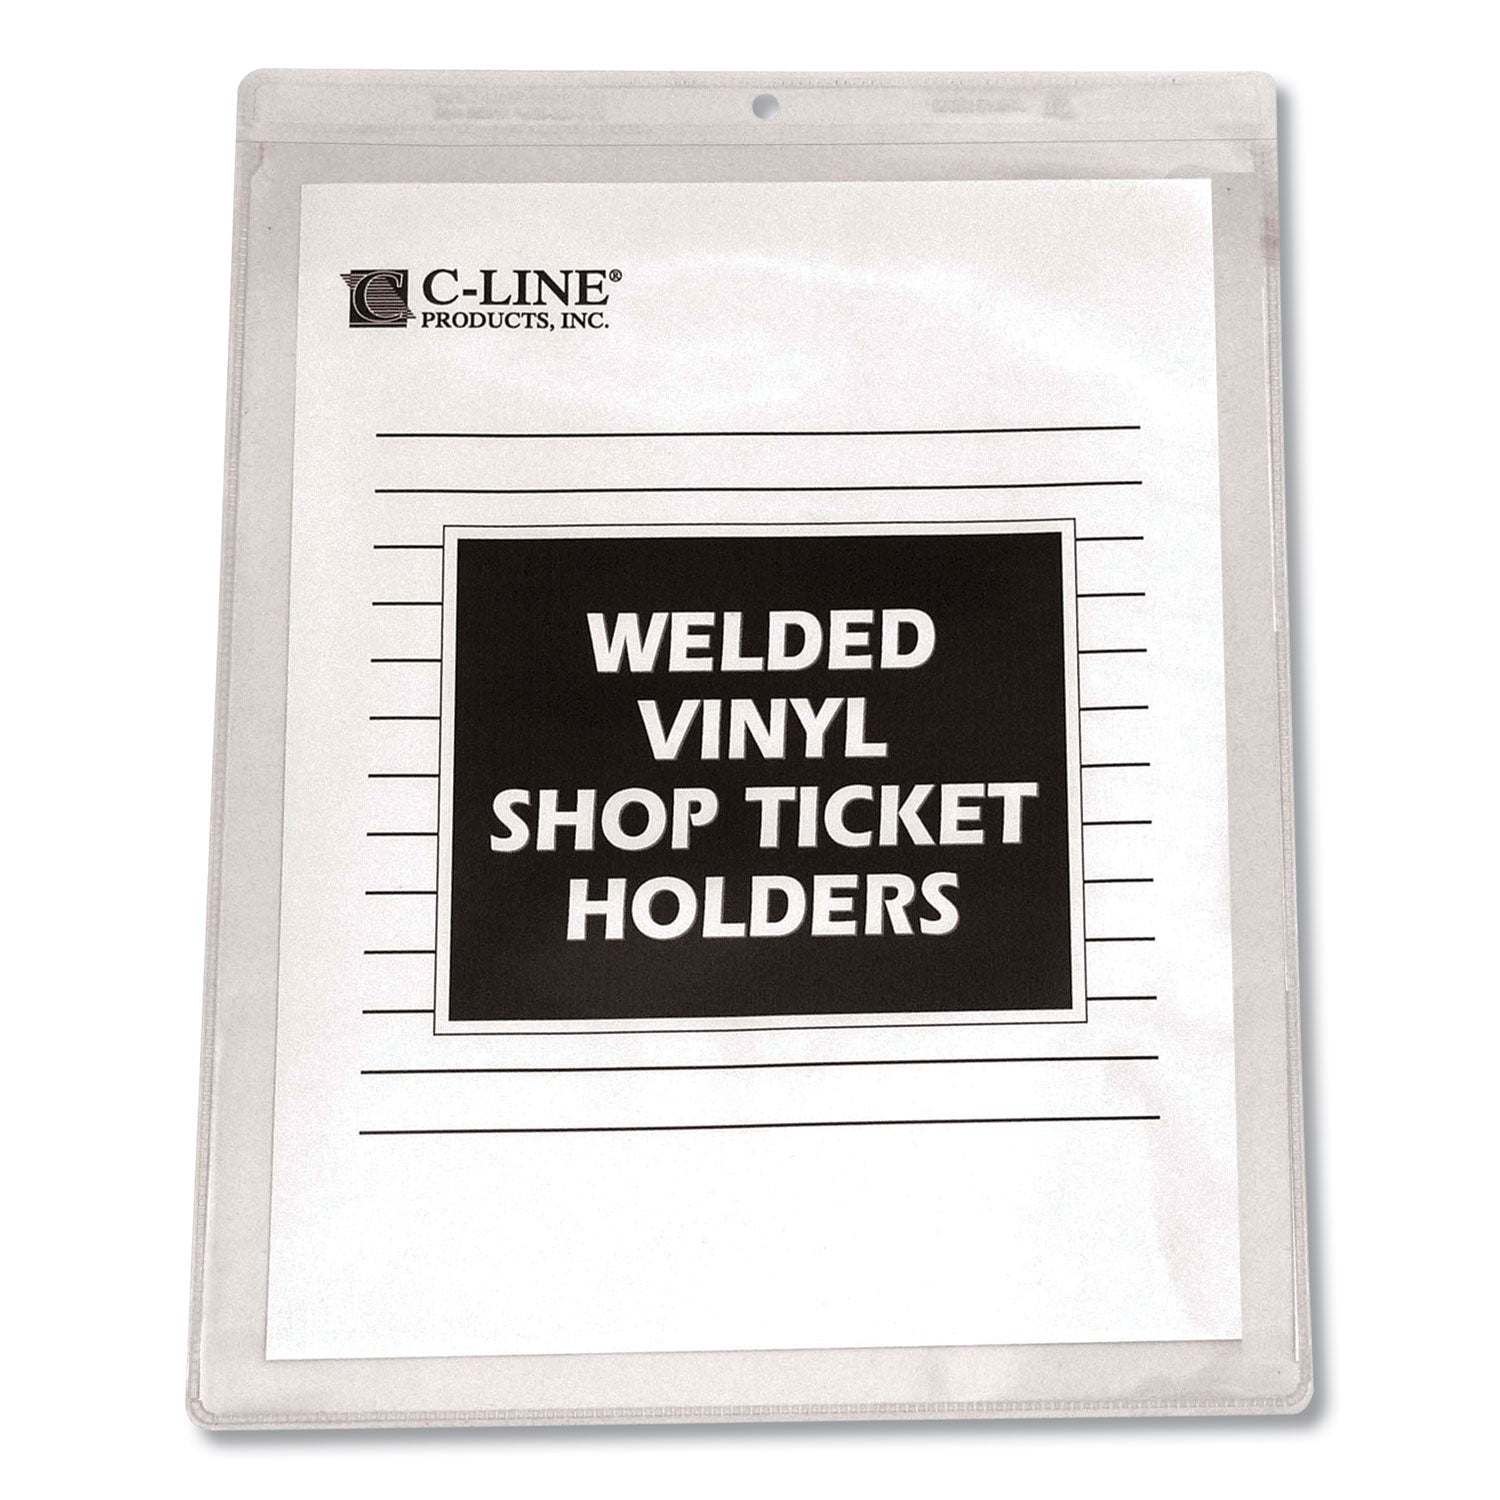 Clear Vinyl Shop Ticket Holders, Both Sides Clear, 50 Sheets, 9 x 12, 50/Box - 